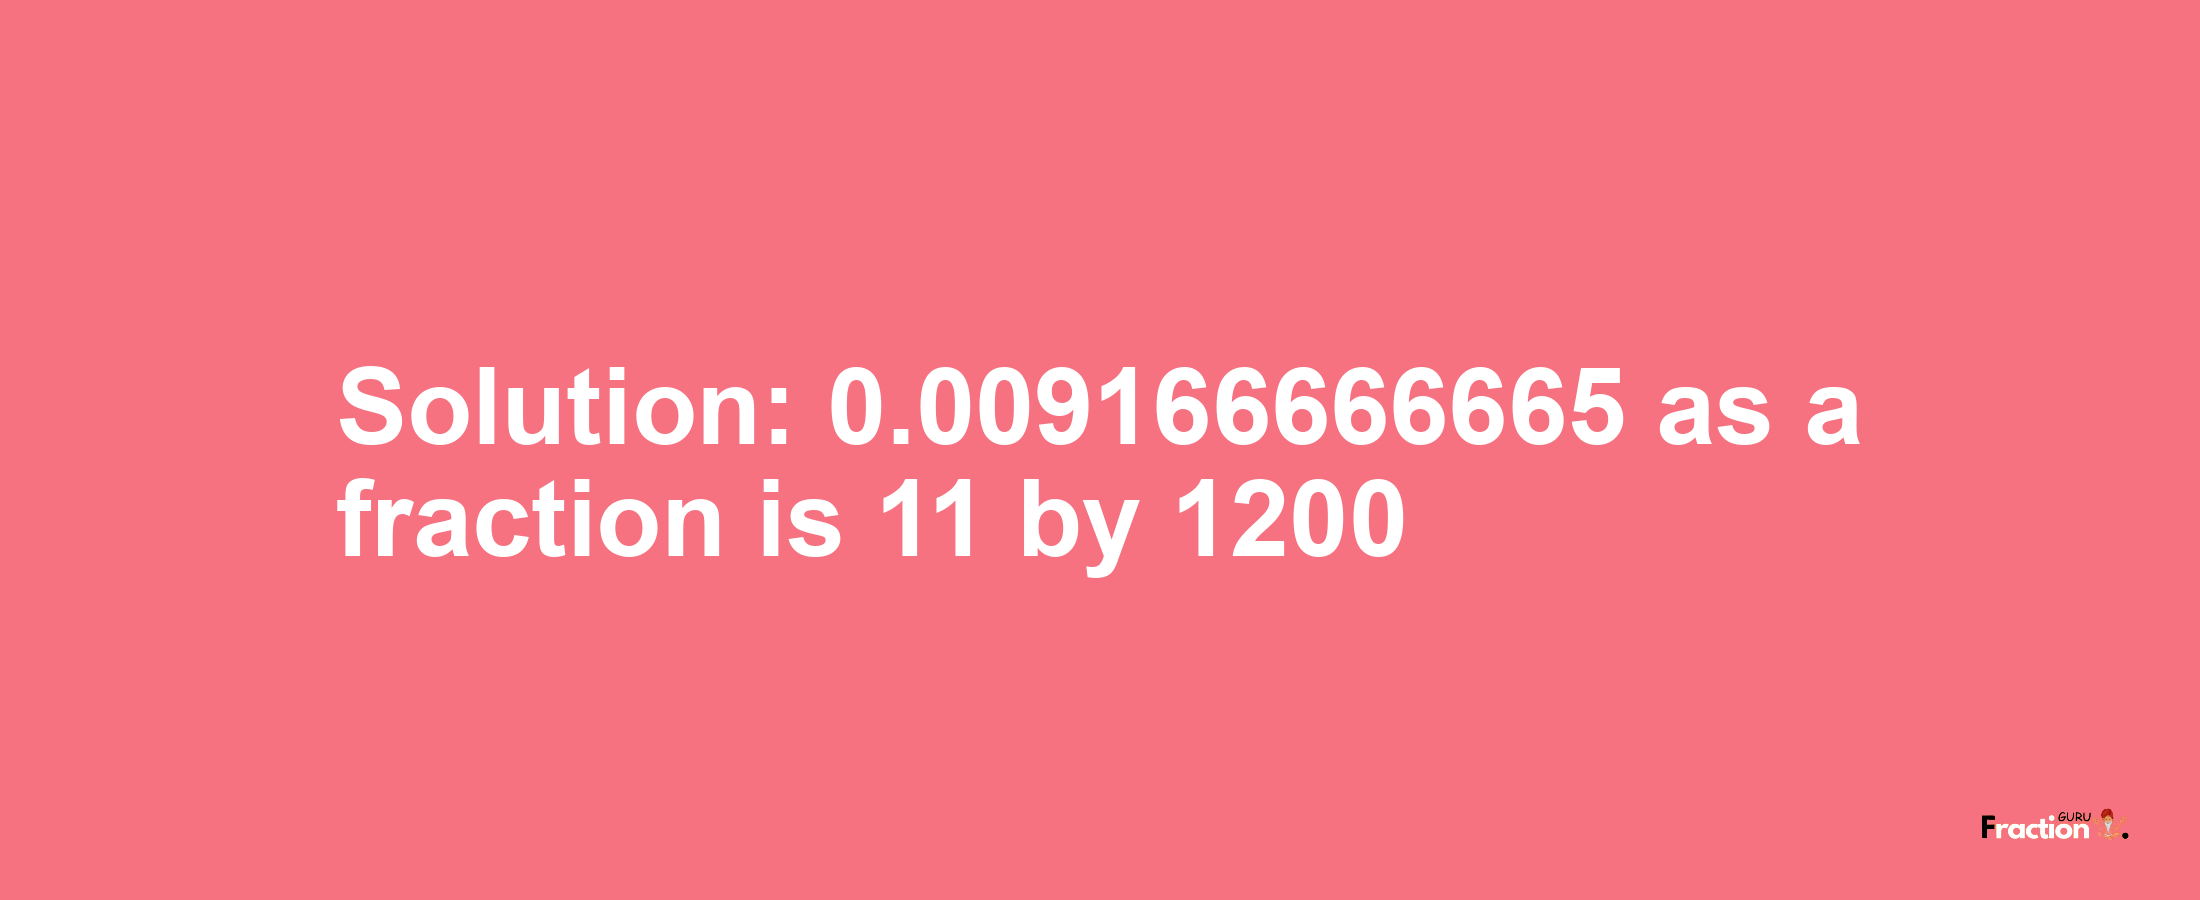 Solution:0.009166666665 as a fraction is 11/1200